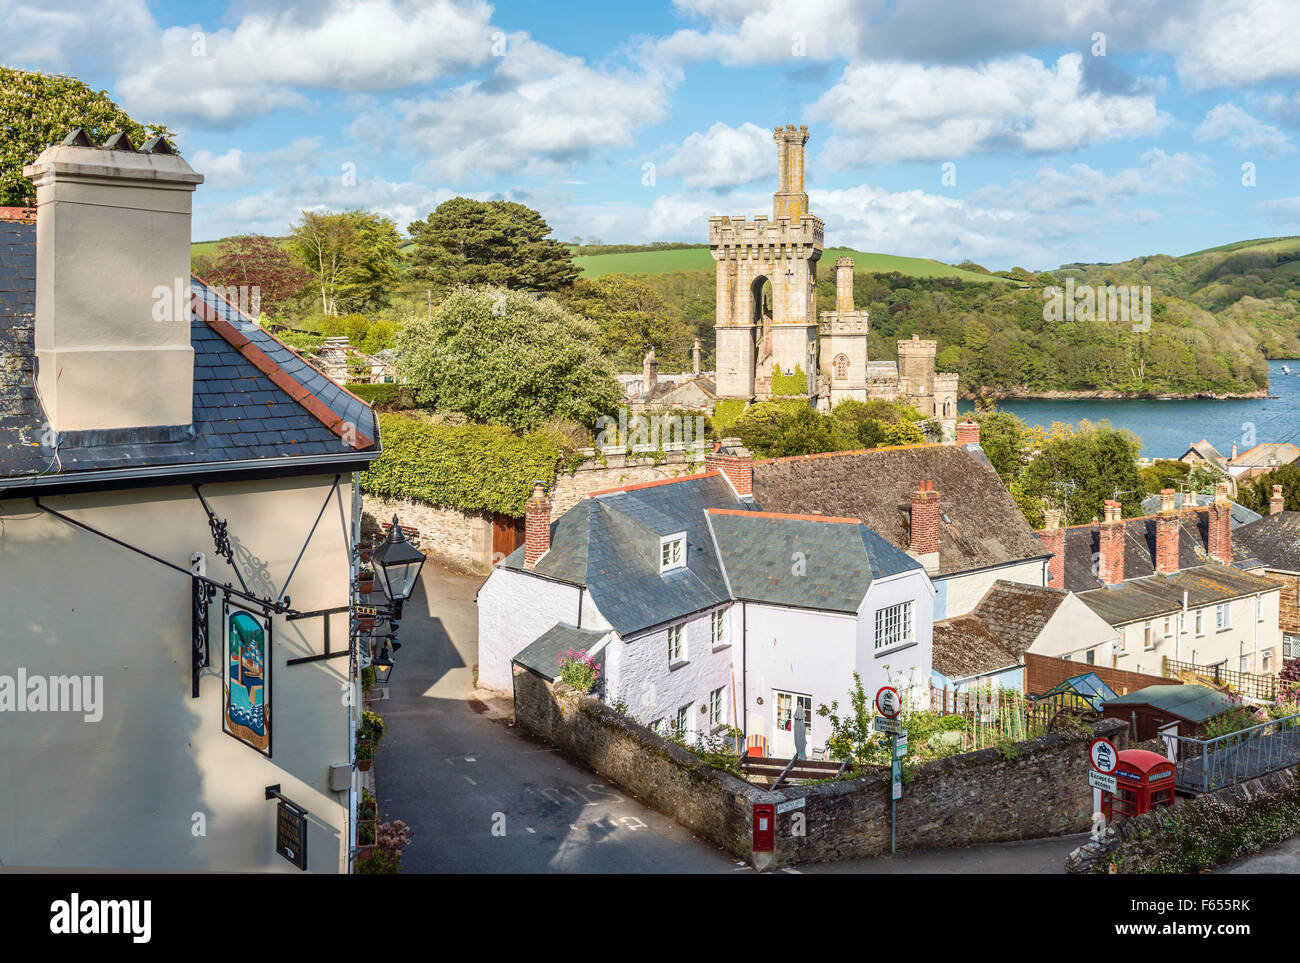 Scenic view over the old town of Fowey, Cornwall, England, UK Stock Photo